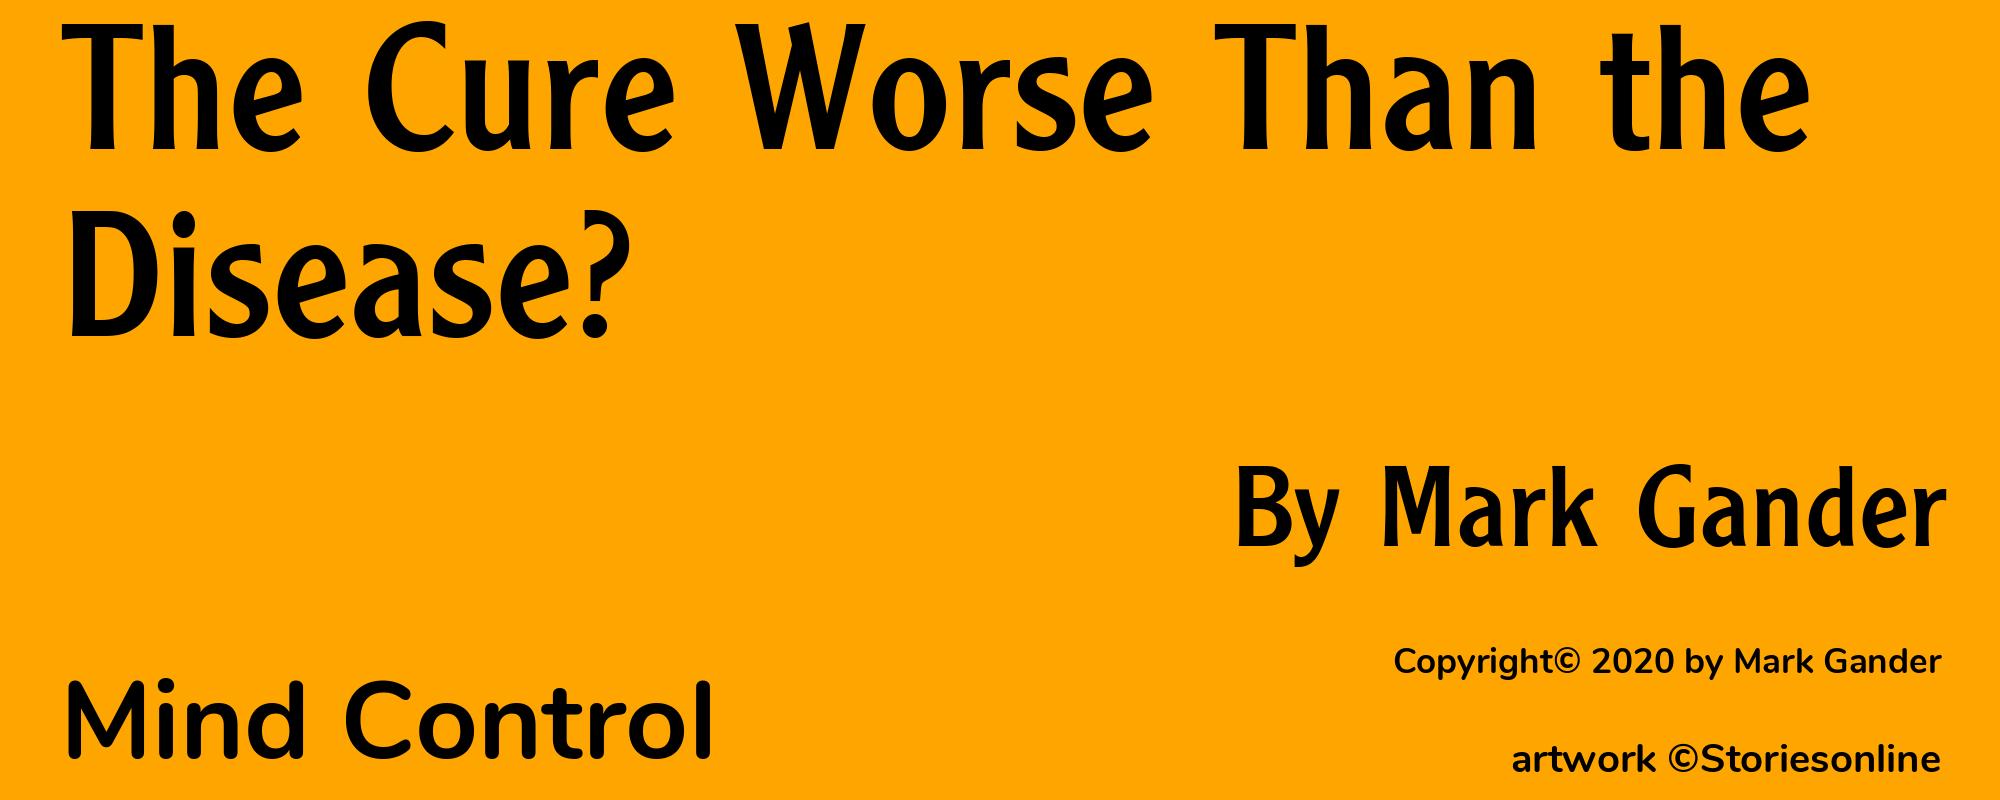 The Cure Worse Than the Disease? - Cover